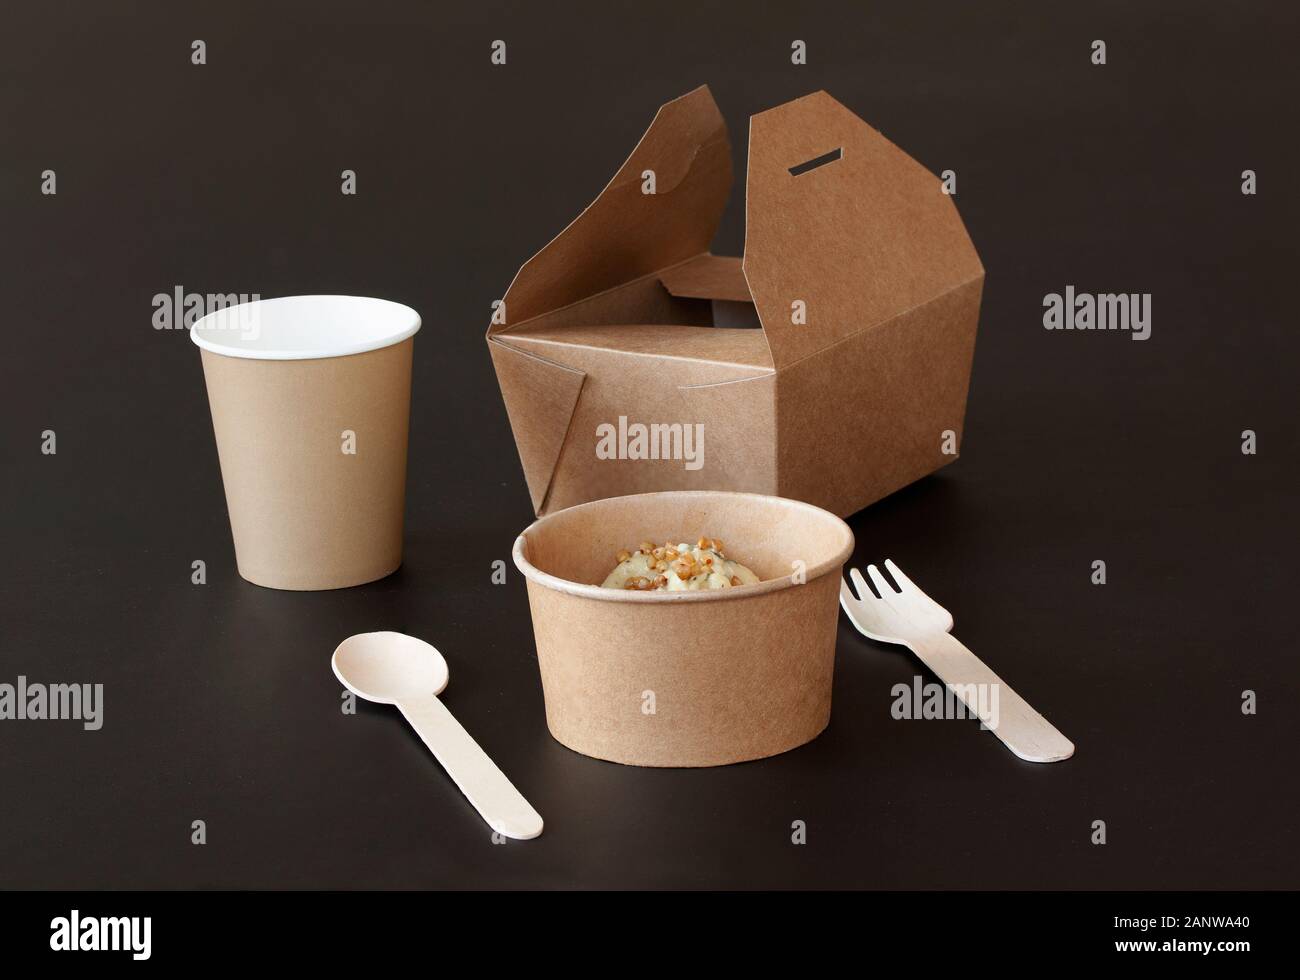 Sustainable Food Packaging. Eco-friendly bamboo sustainable and disposable tableware and take-out packaging on black background. Copenhagen, Denmark - Stock Photo